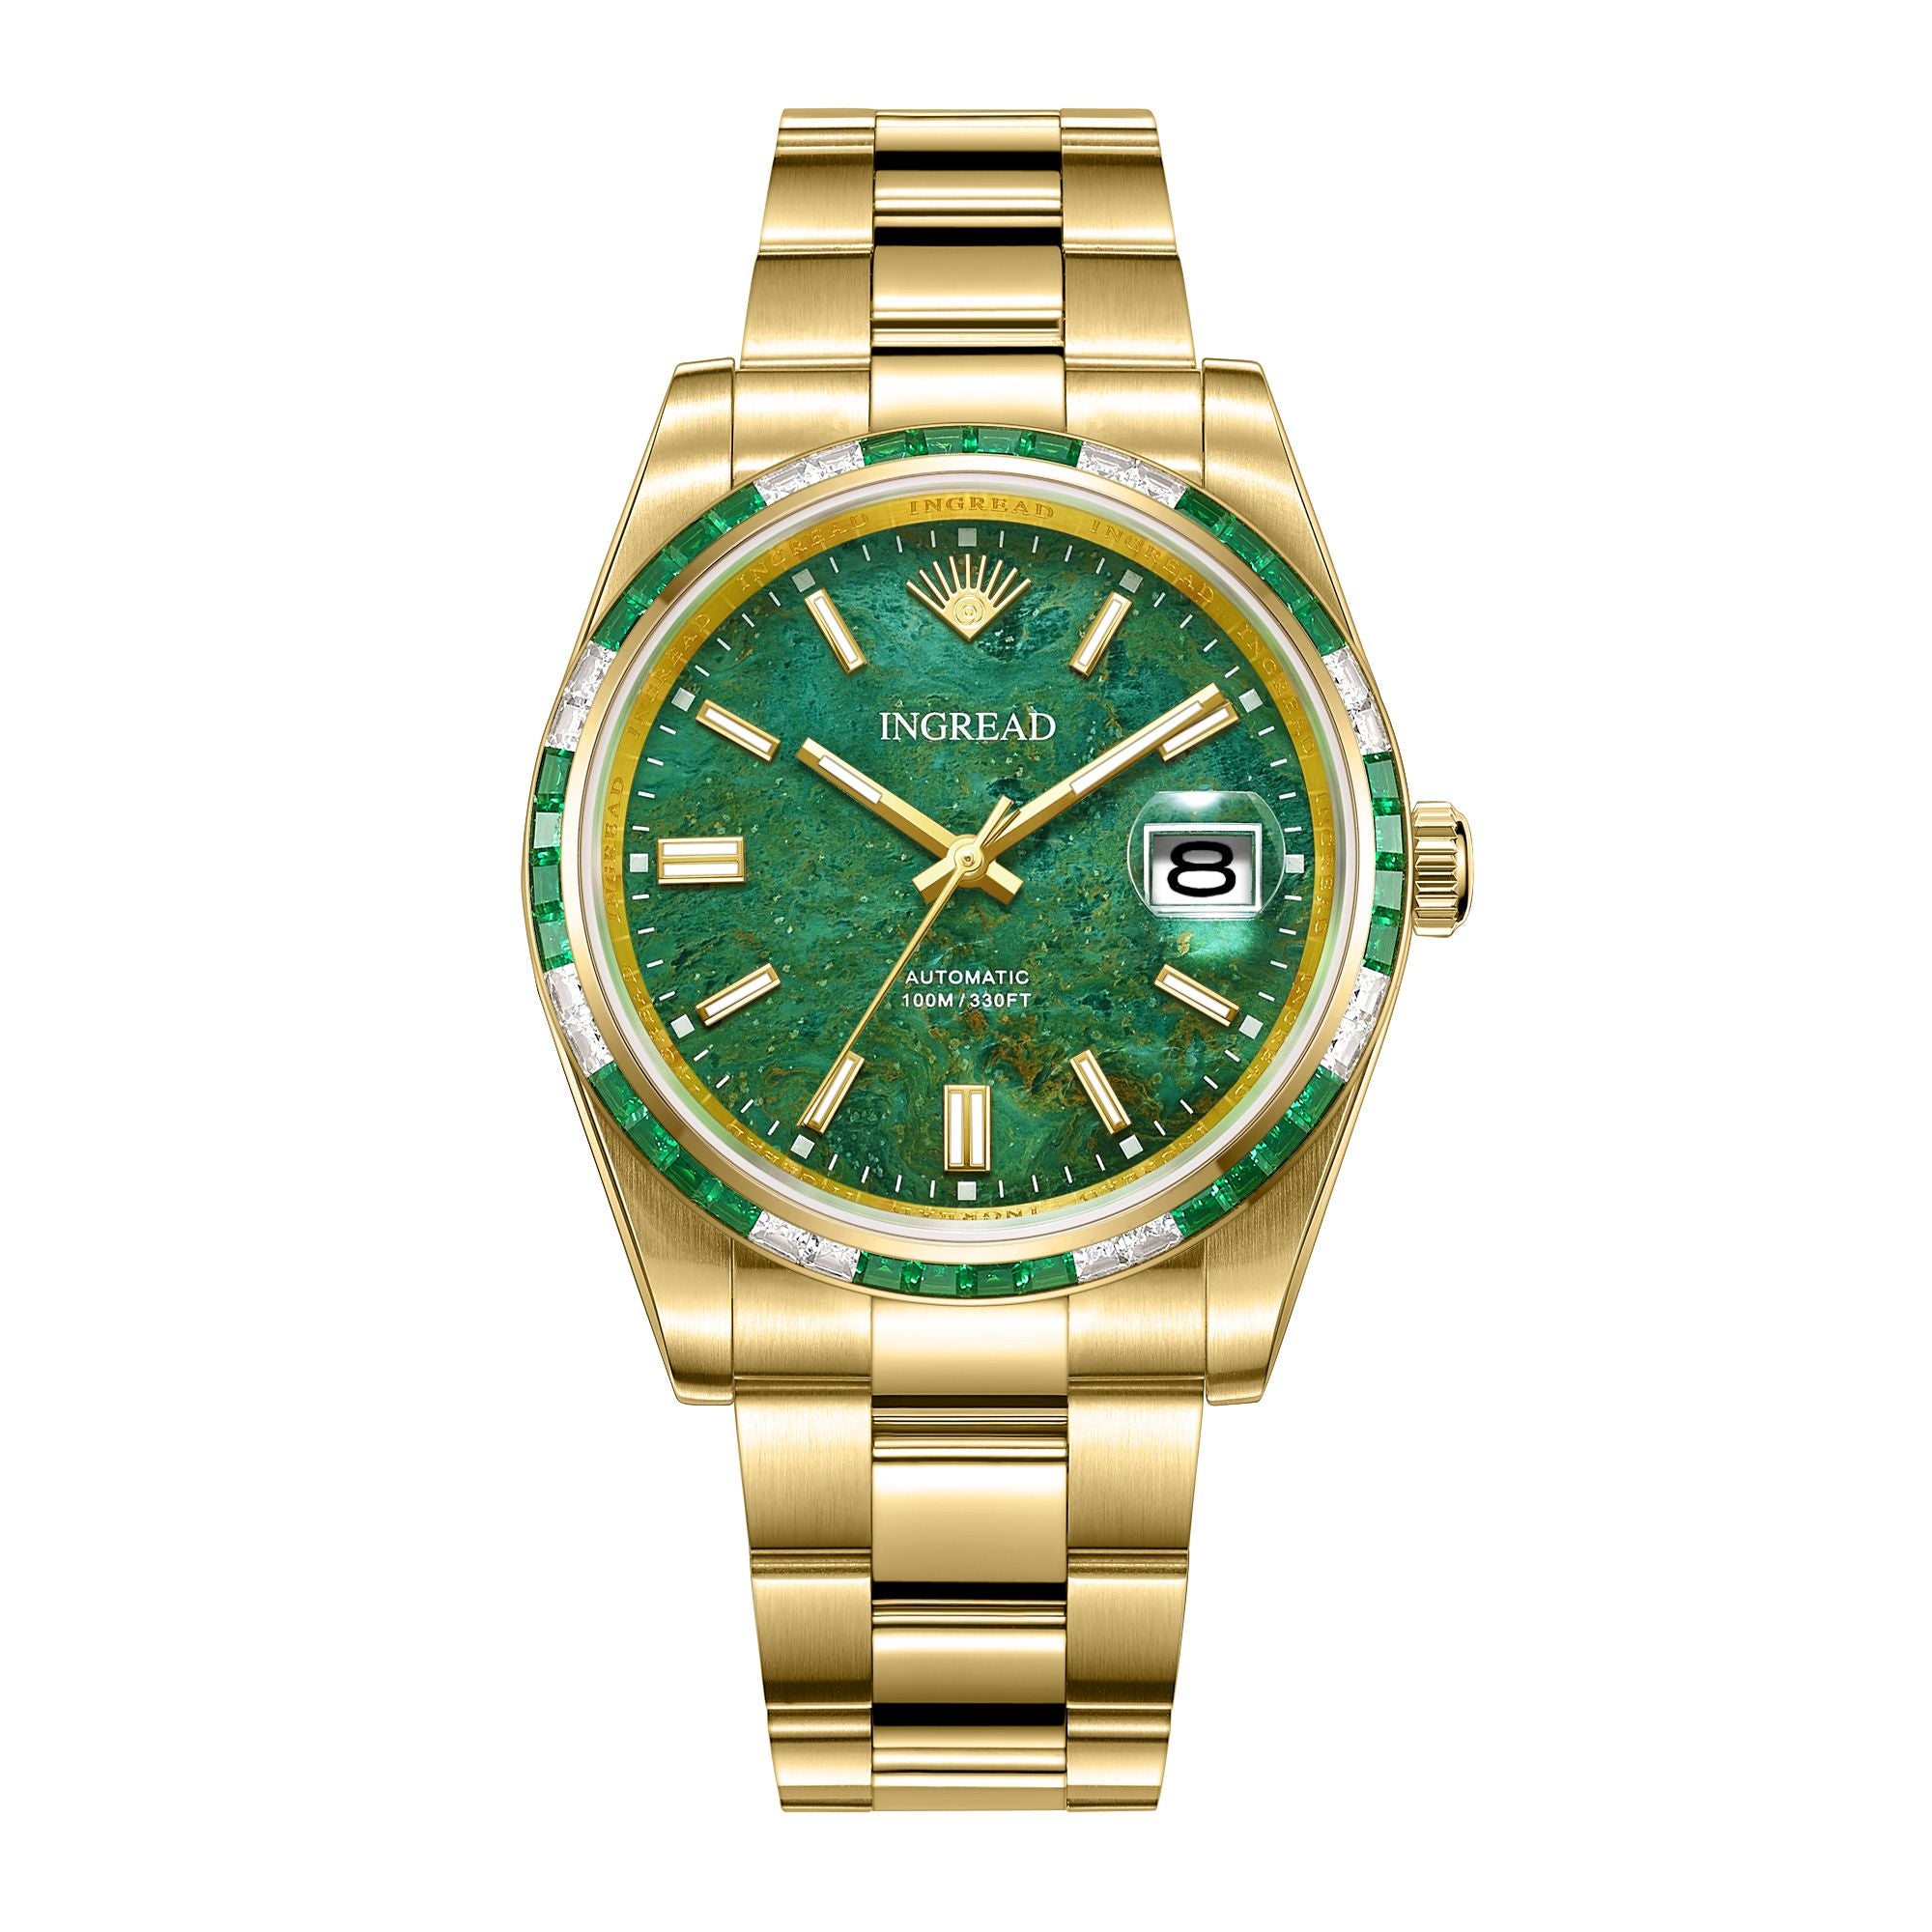 African Jade Dial with Zircon Gems, Sapphire Crystal, 40mm, Stainless Steel, IN-23006-77